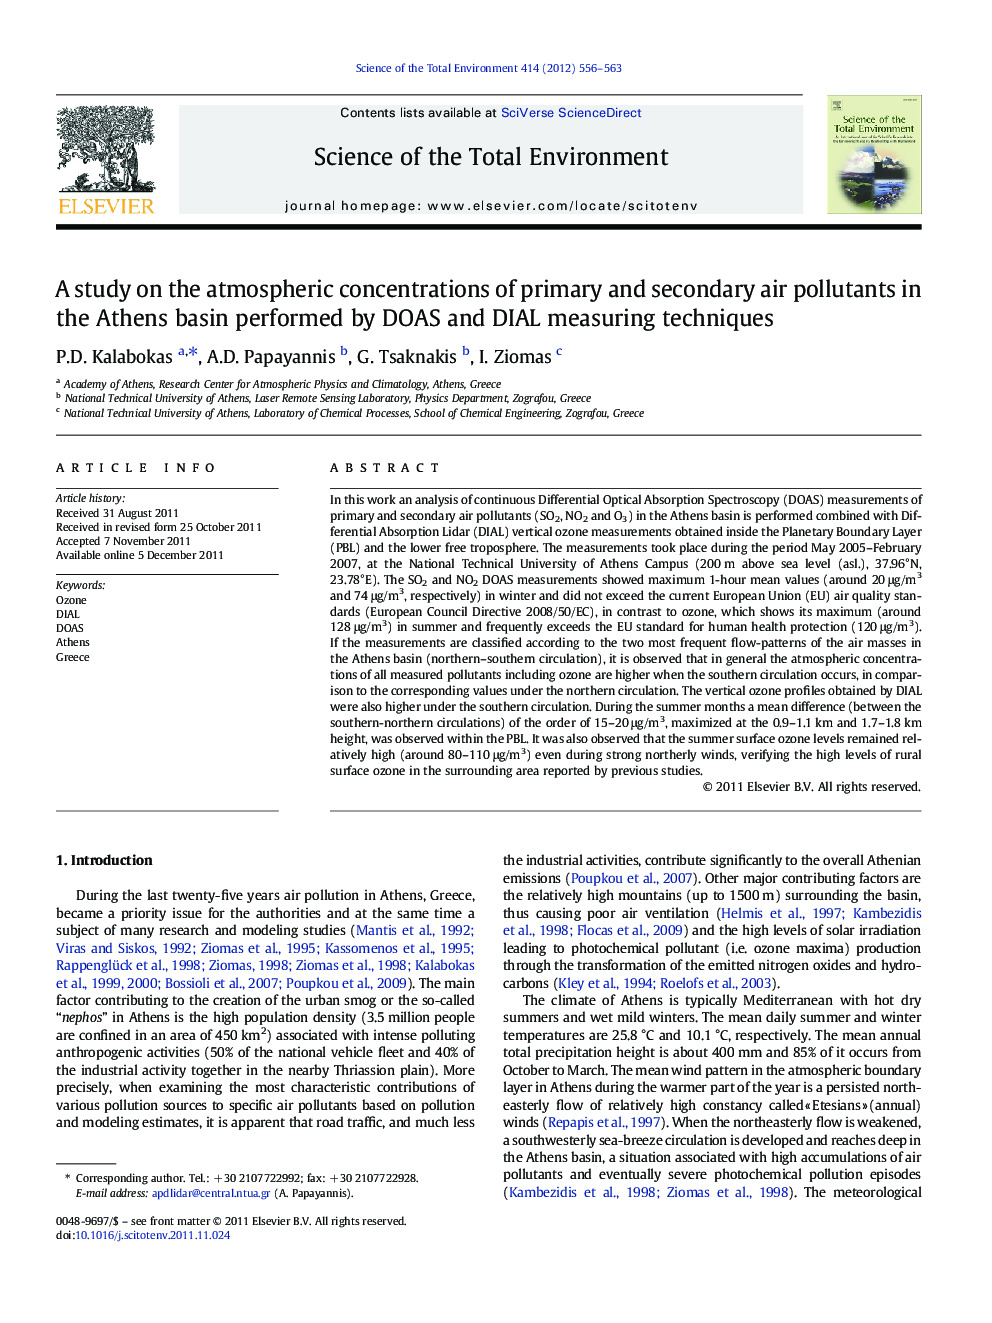 A study on the atmospheric concentrations of primary and secondary air pollutants in the Athens basin performed by DOAS and DIAL measuring techniques